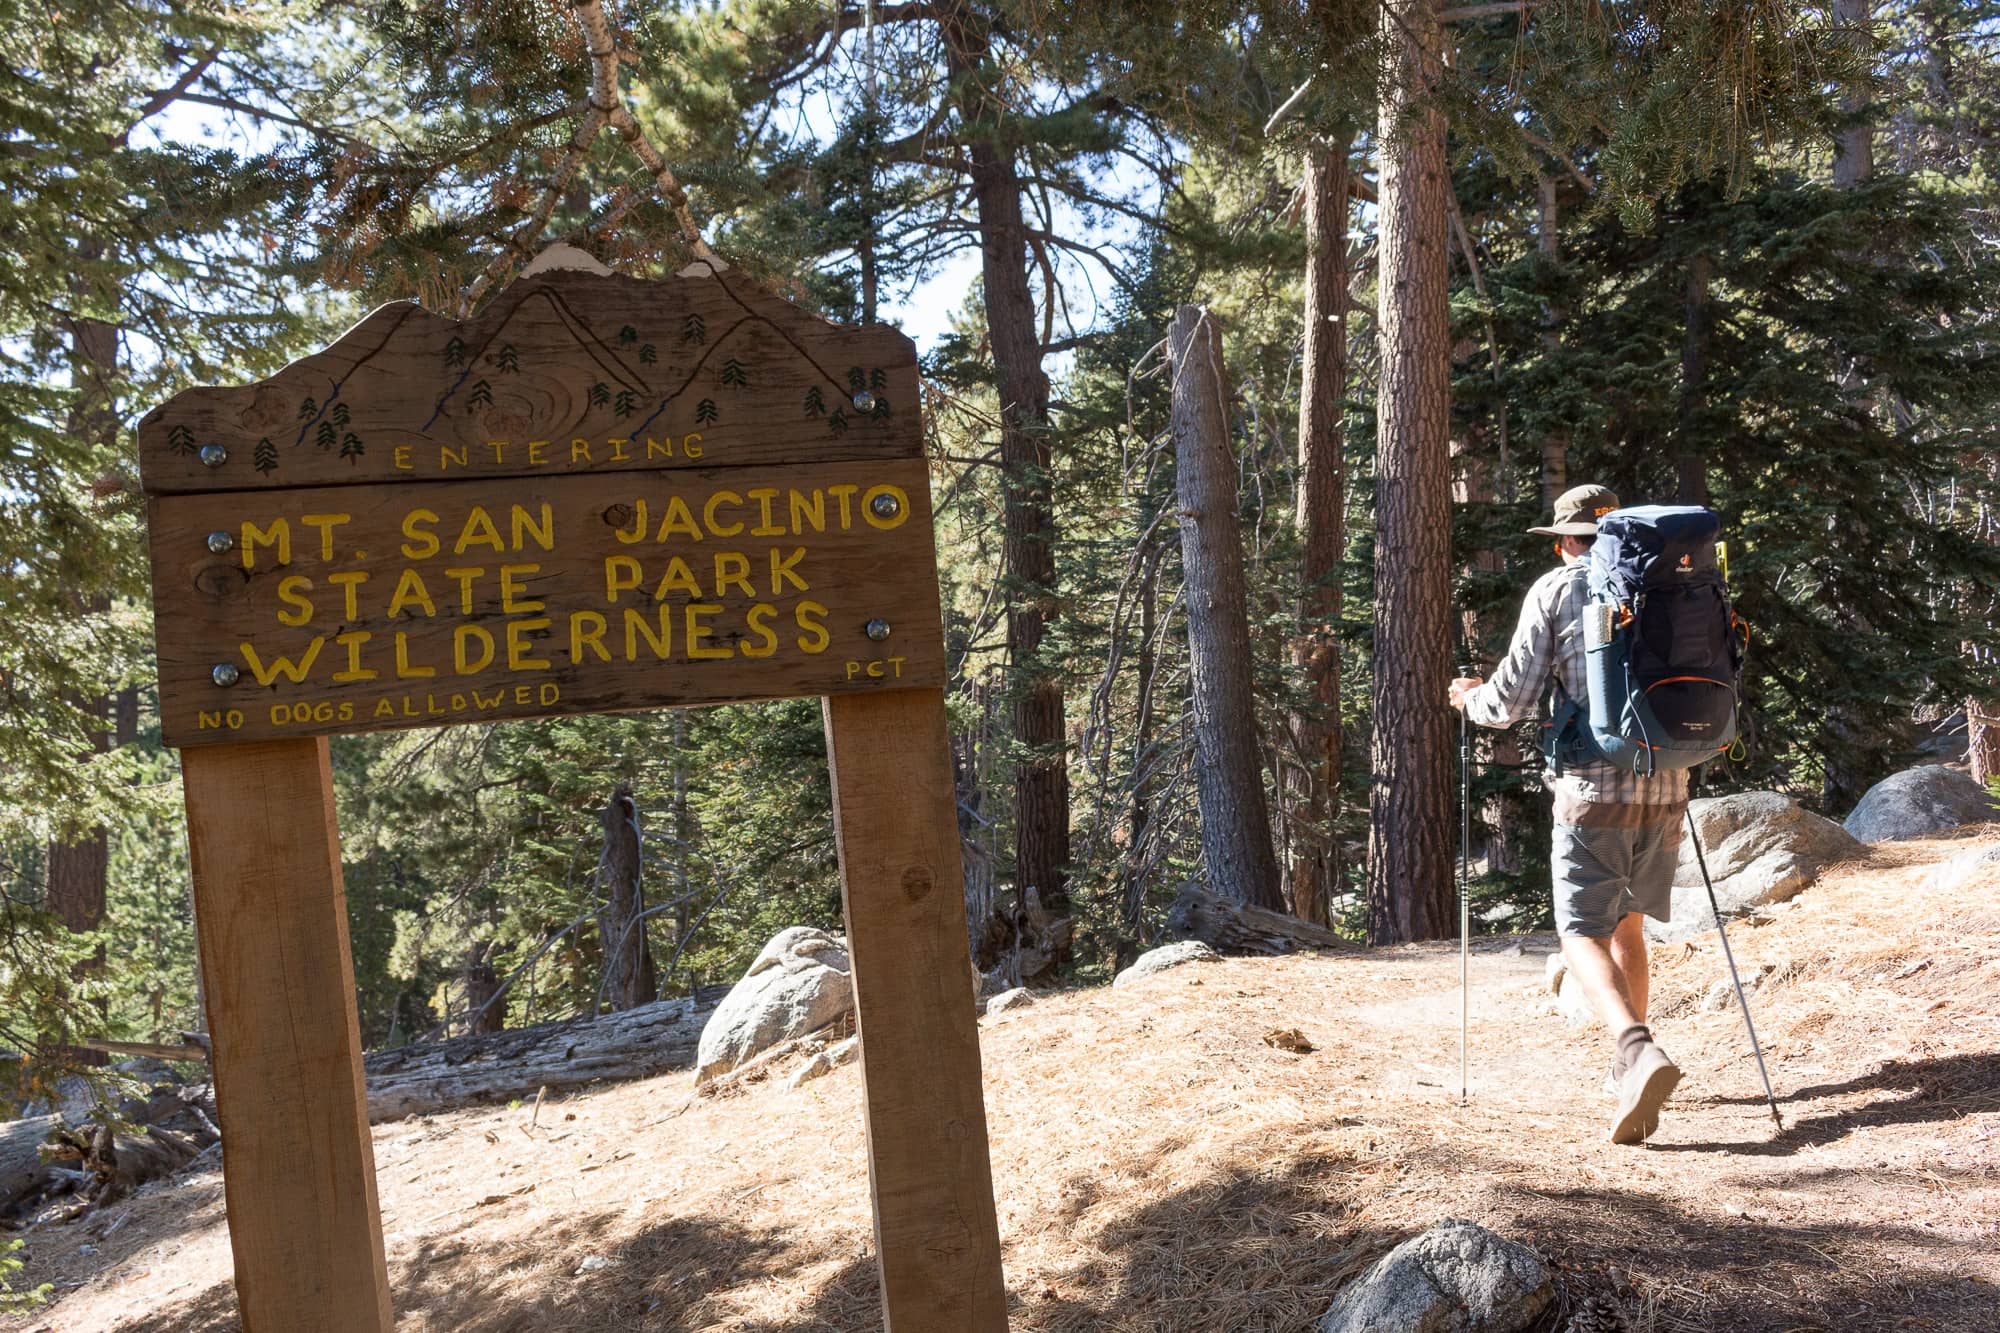 Get all the info you need for backpacking the San Jacinto Peak Loop Trail, the most scenic route to summit San Jacinto Peak.